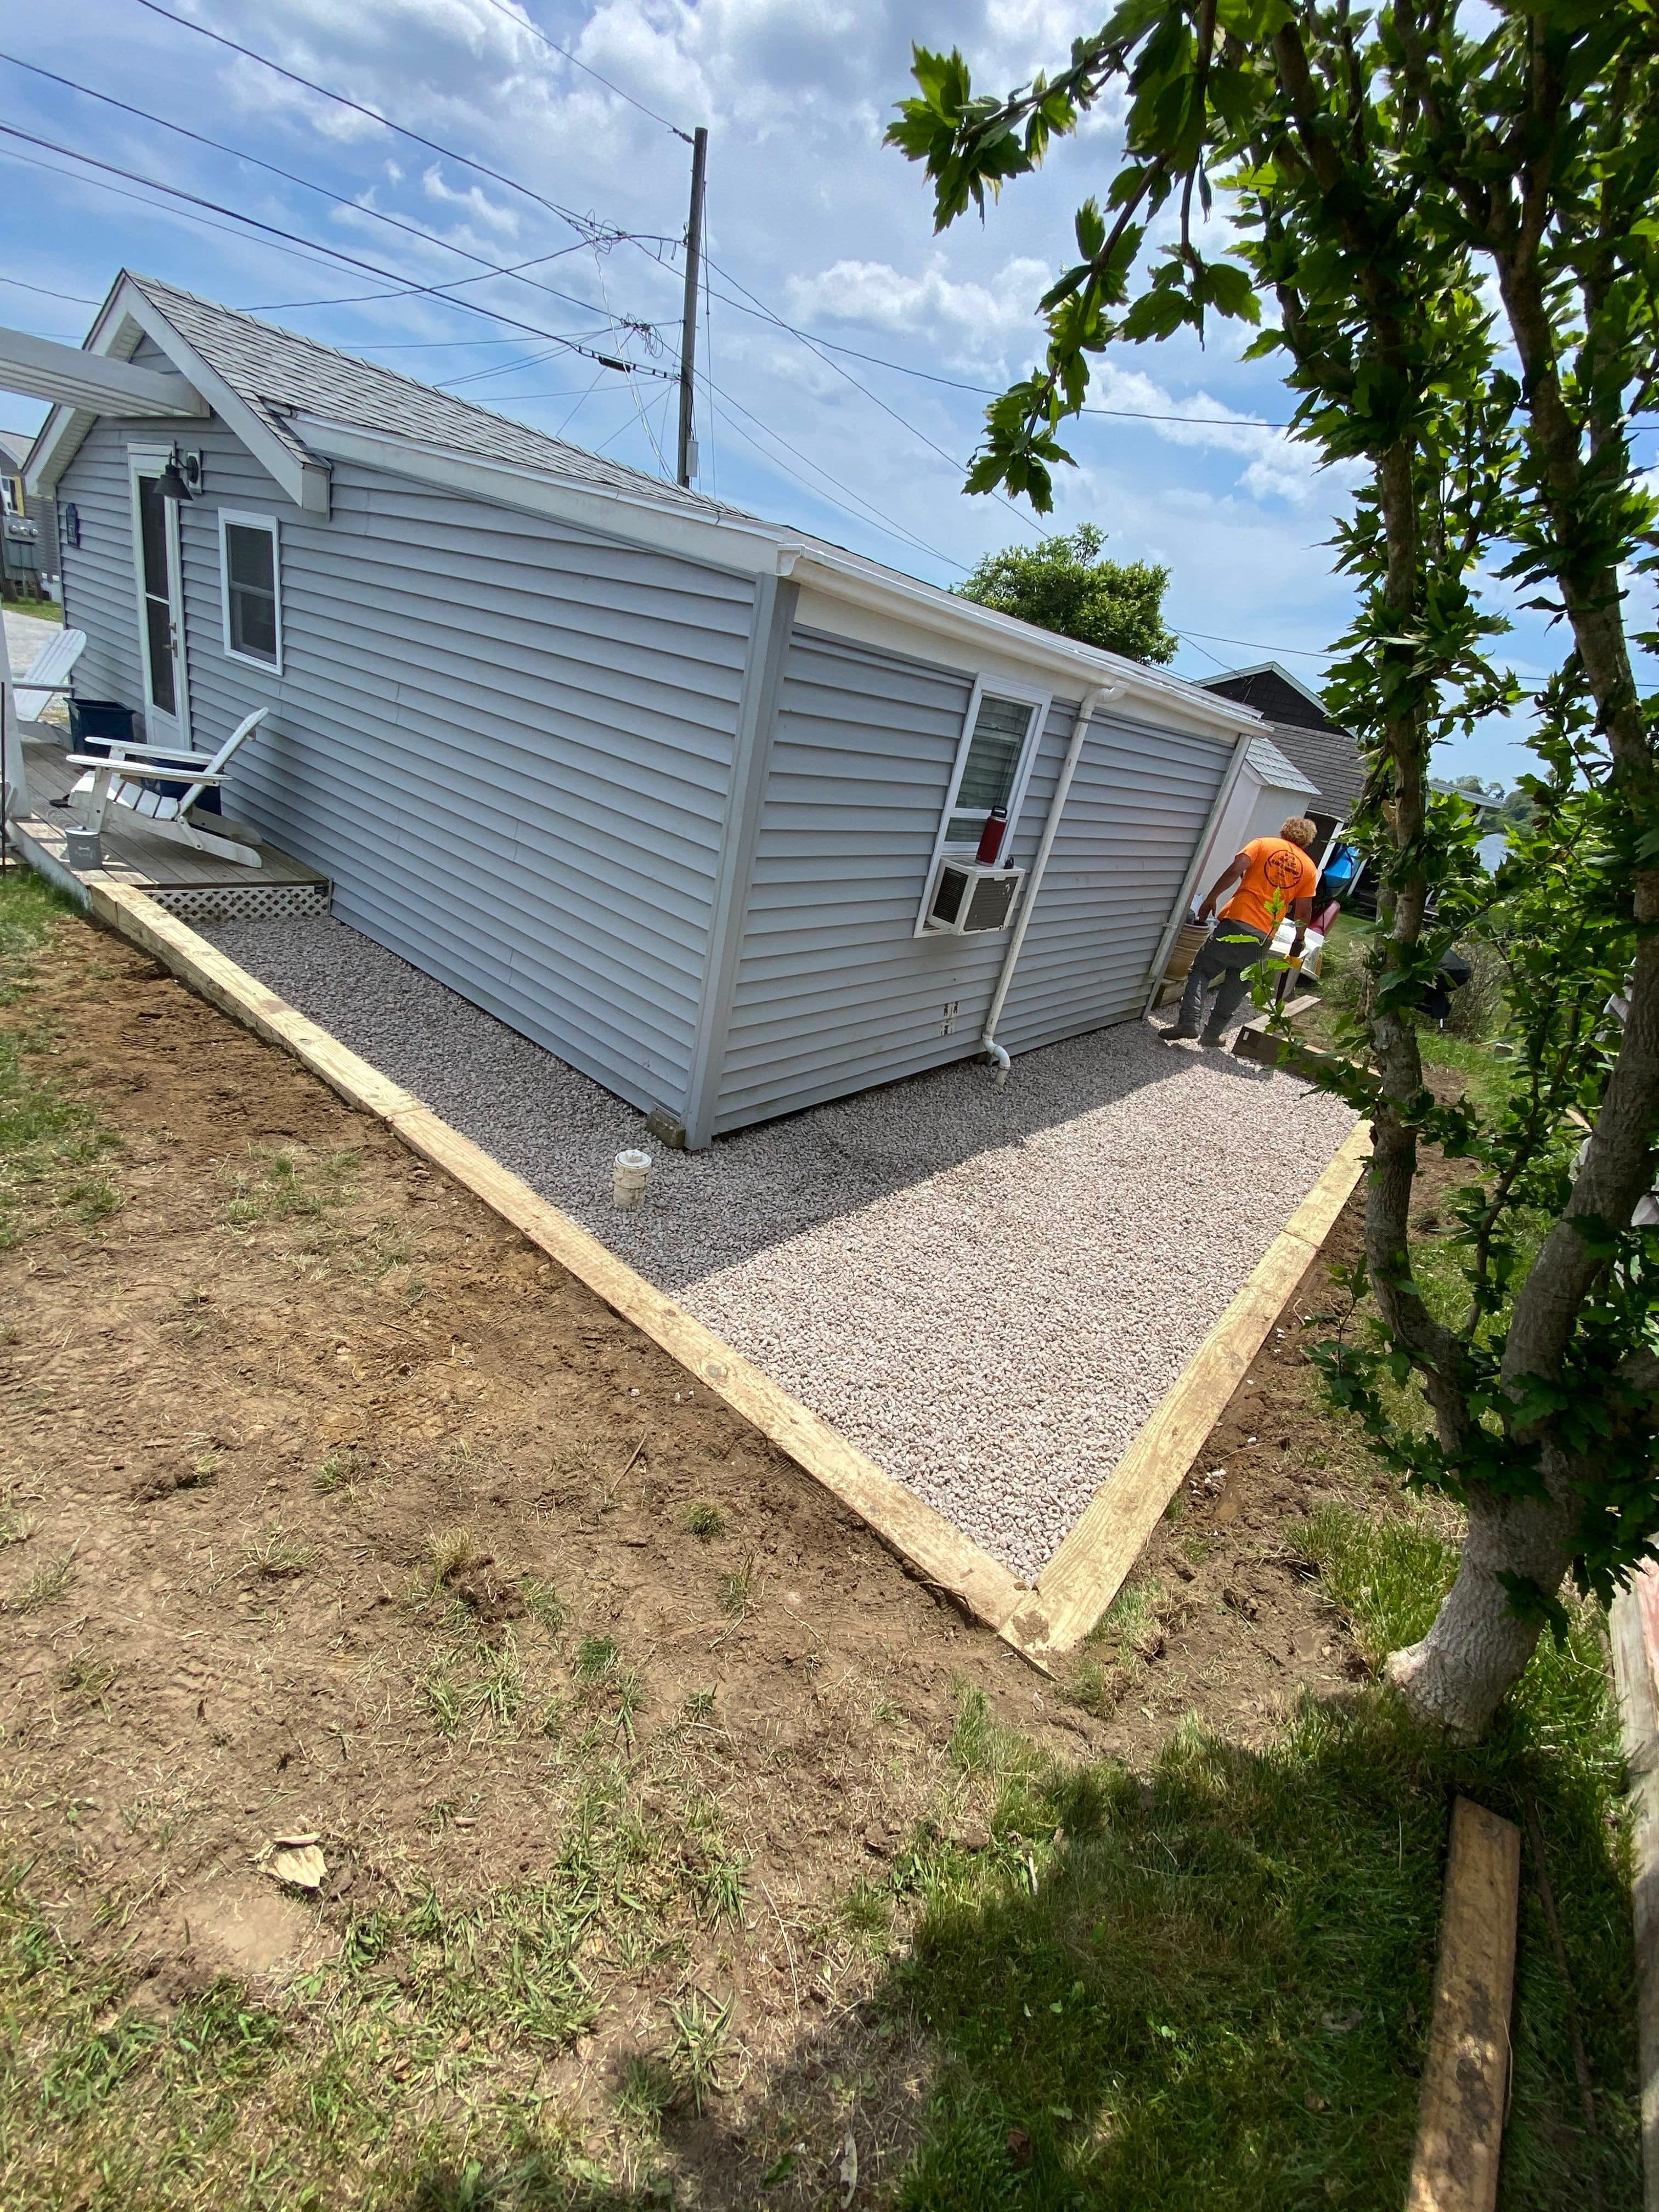 Clark and Company installing a new walkway at this home in Wakefield, RI